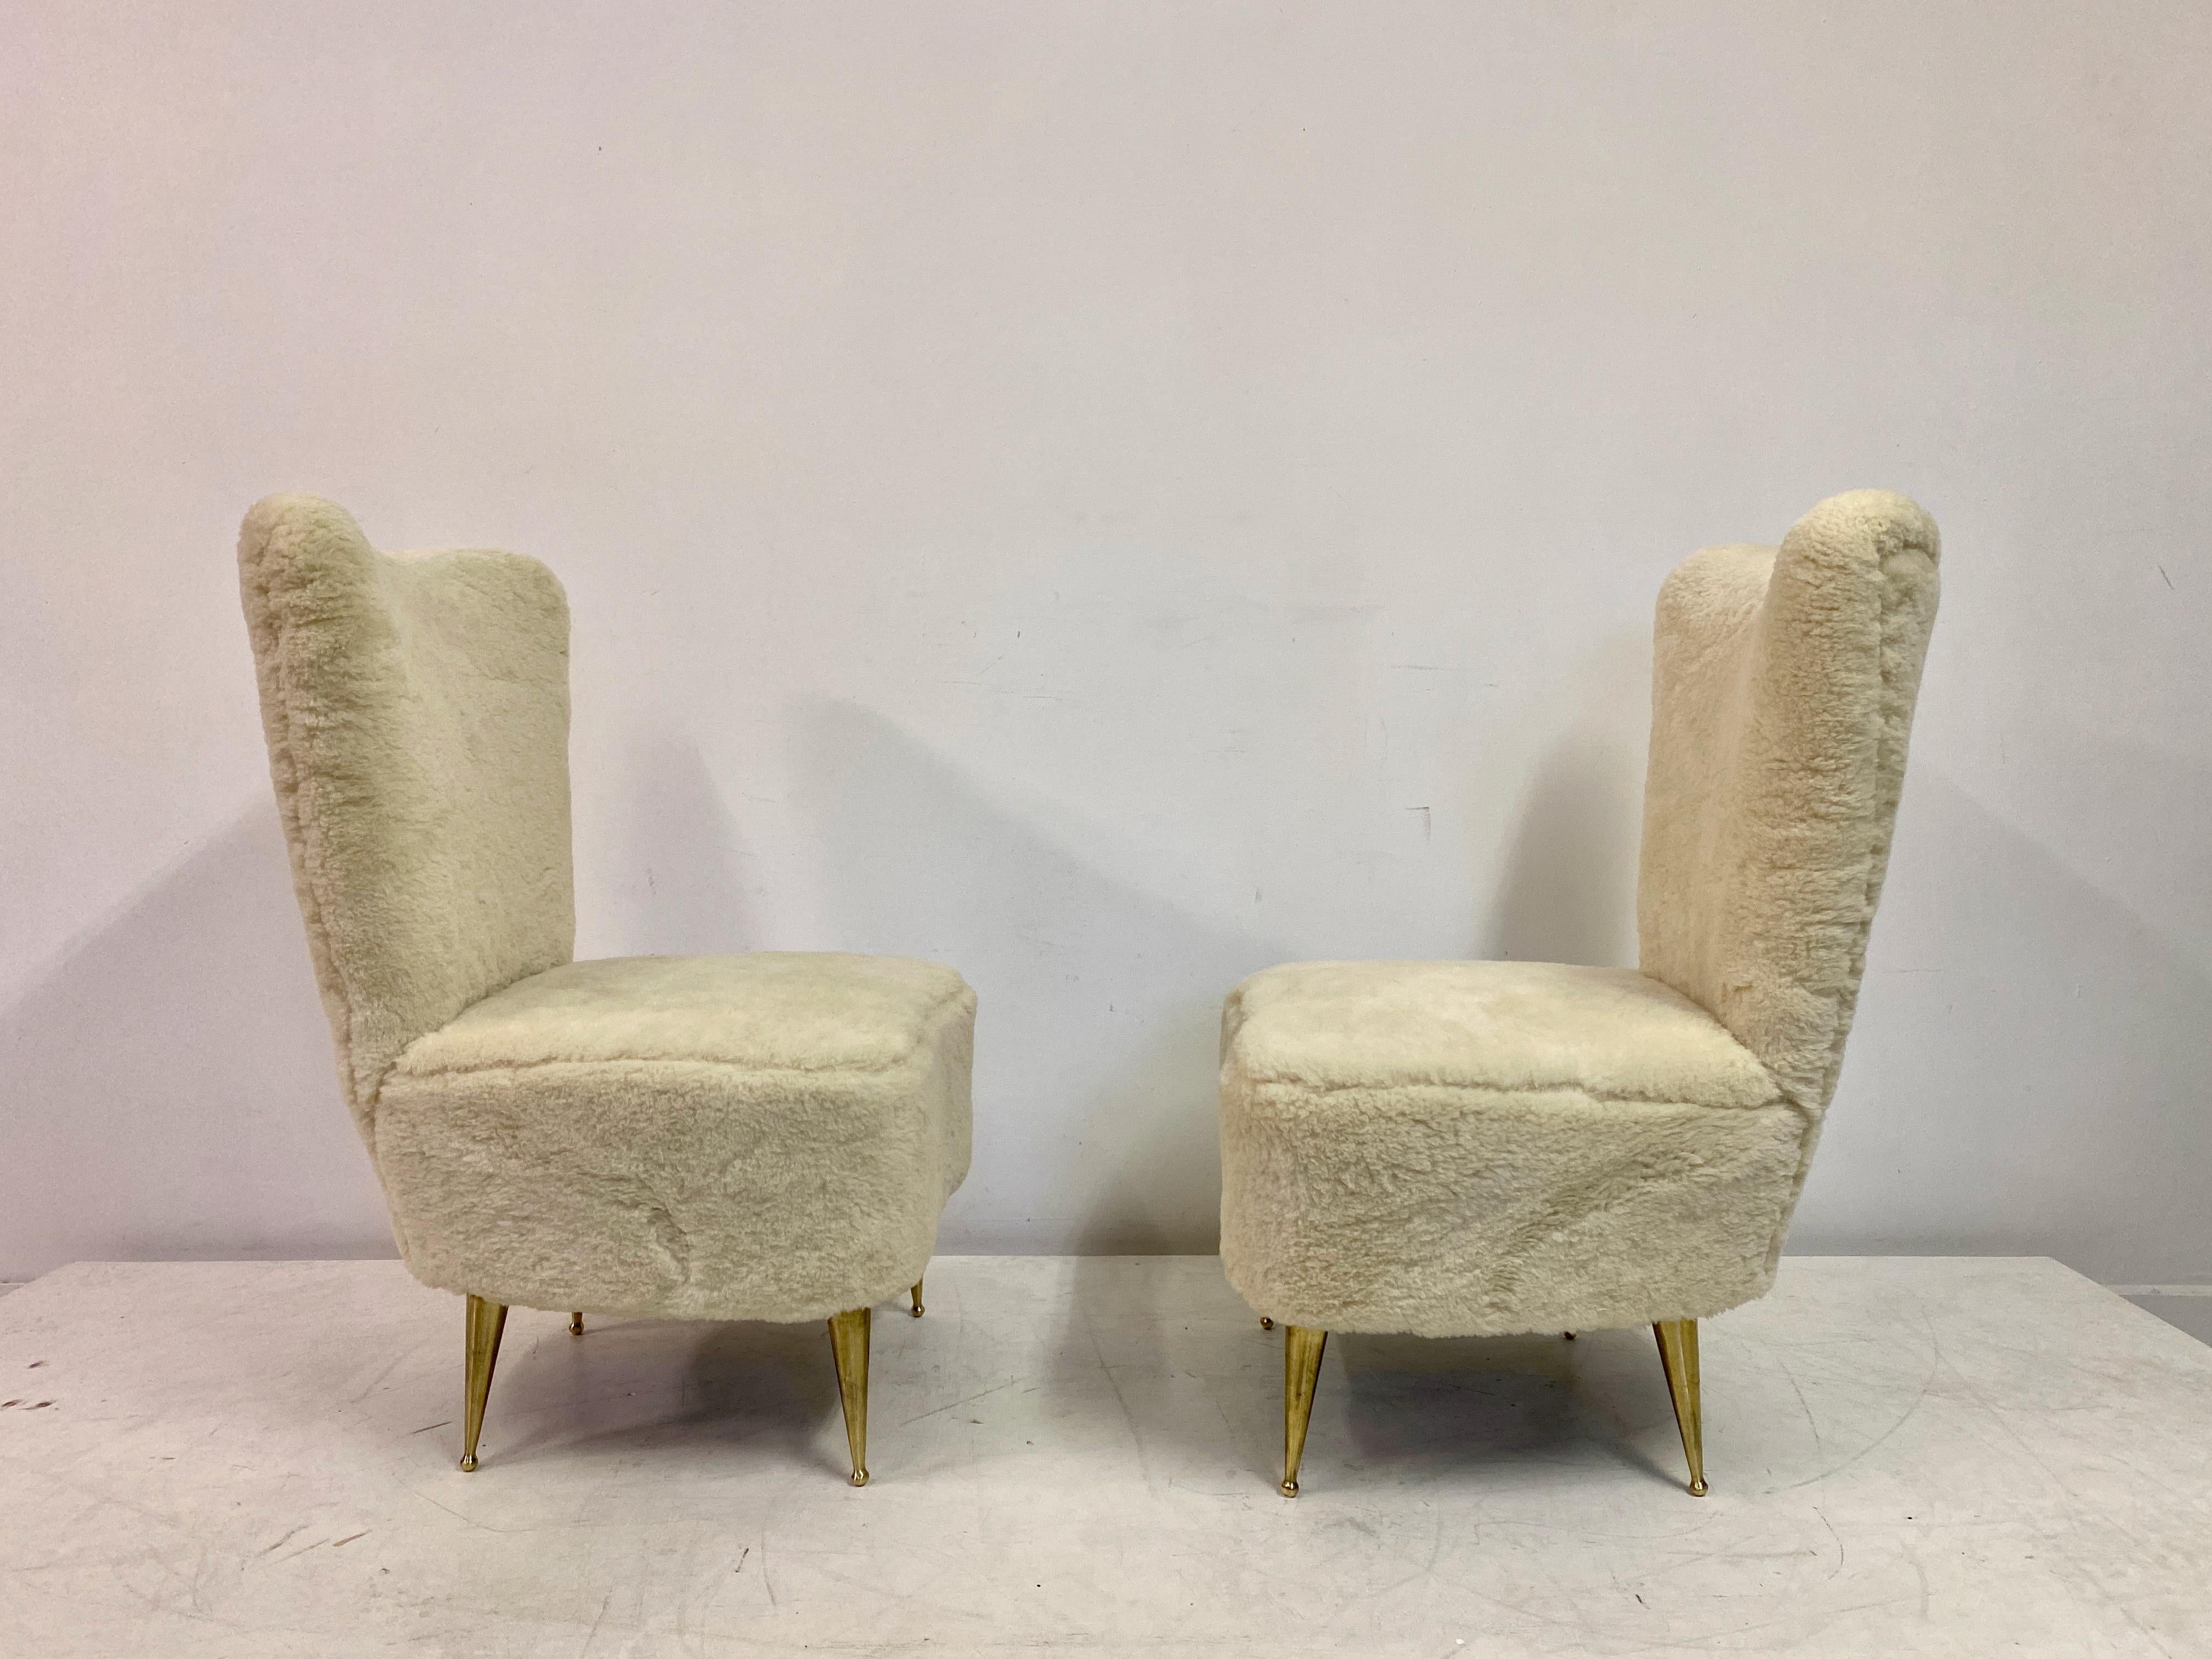 Pair Of 1950S Italian Slipper Chairs In Faux Fur In Good Condition For Sale In London, London